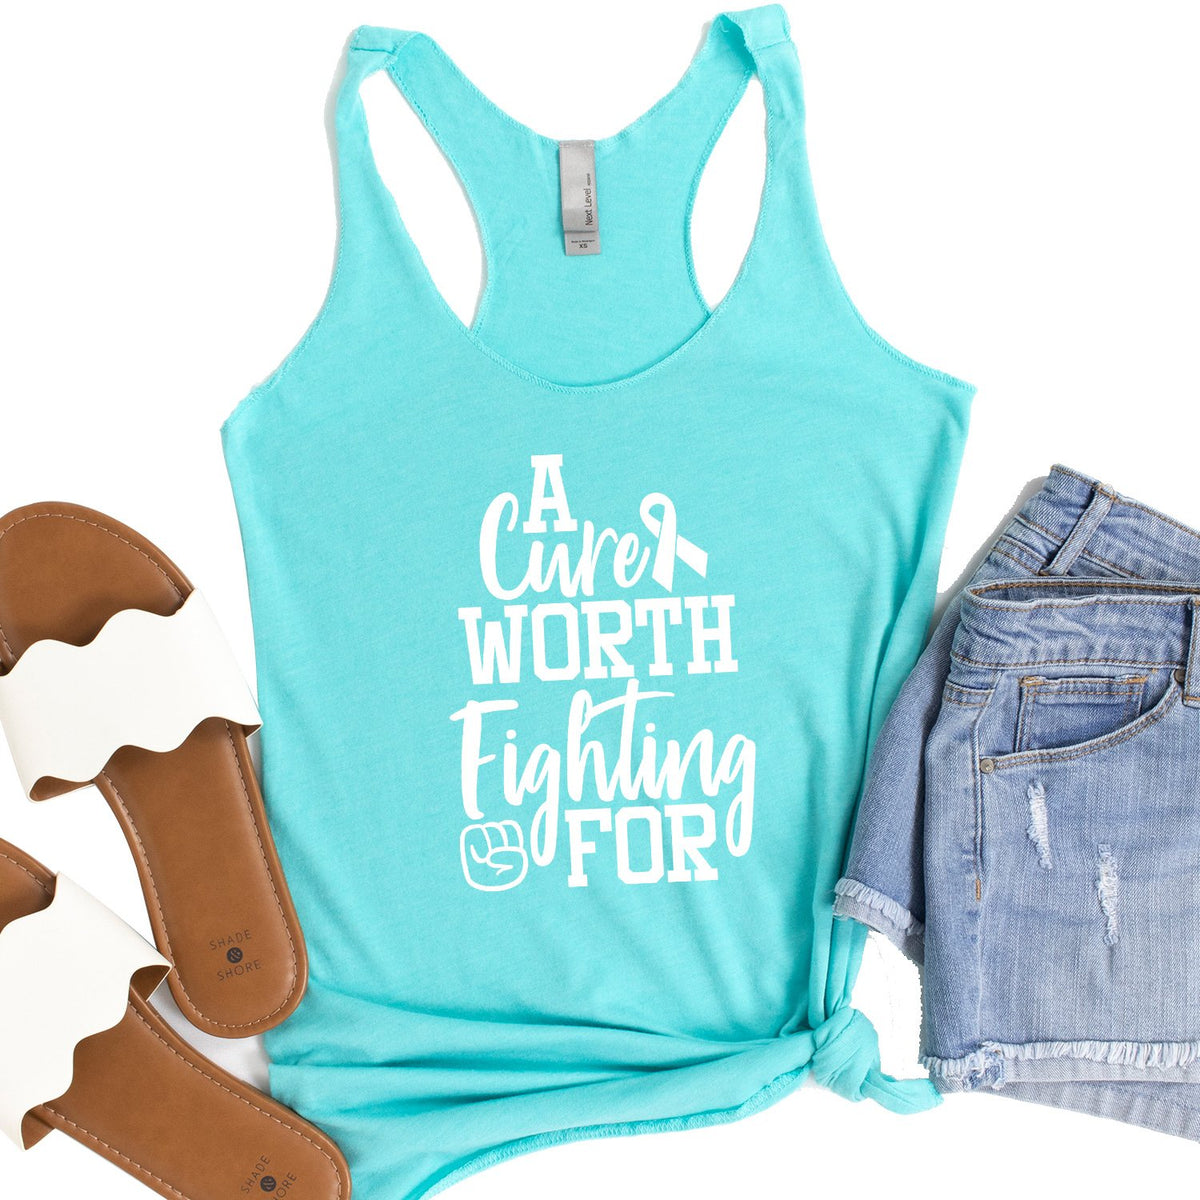 A Cure Worth Fighting For - Tank Top Racerback